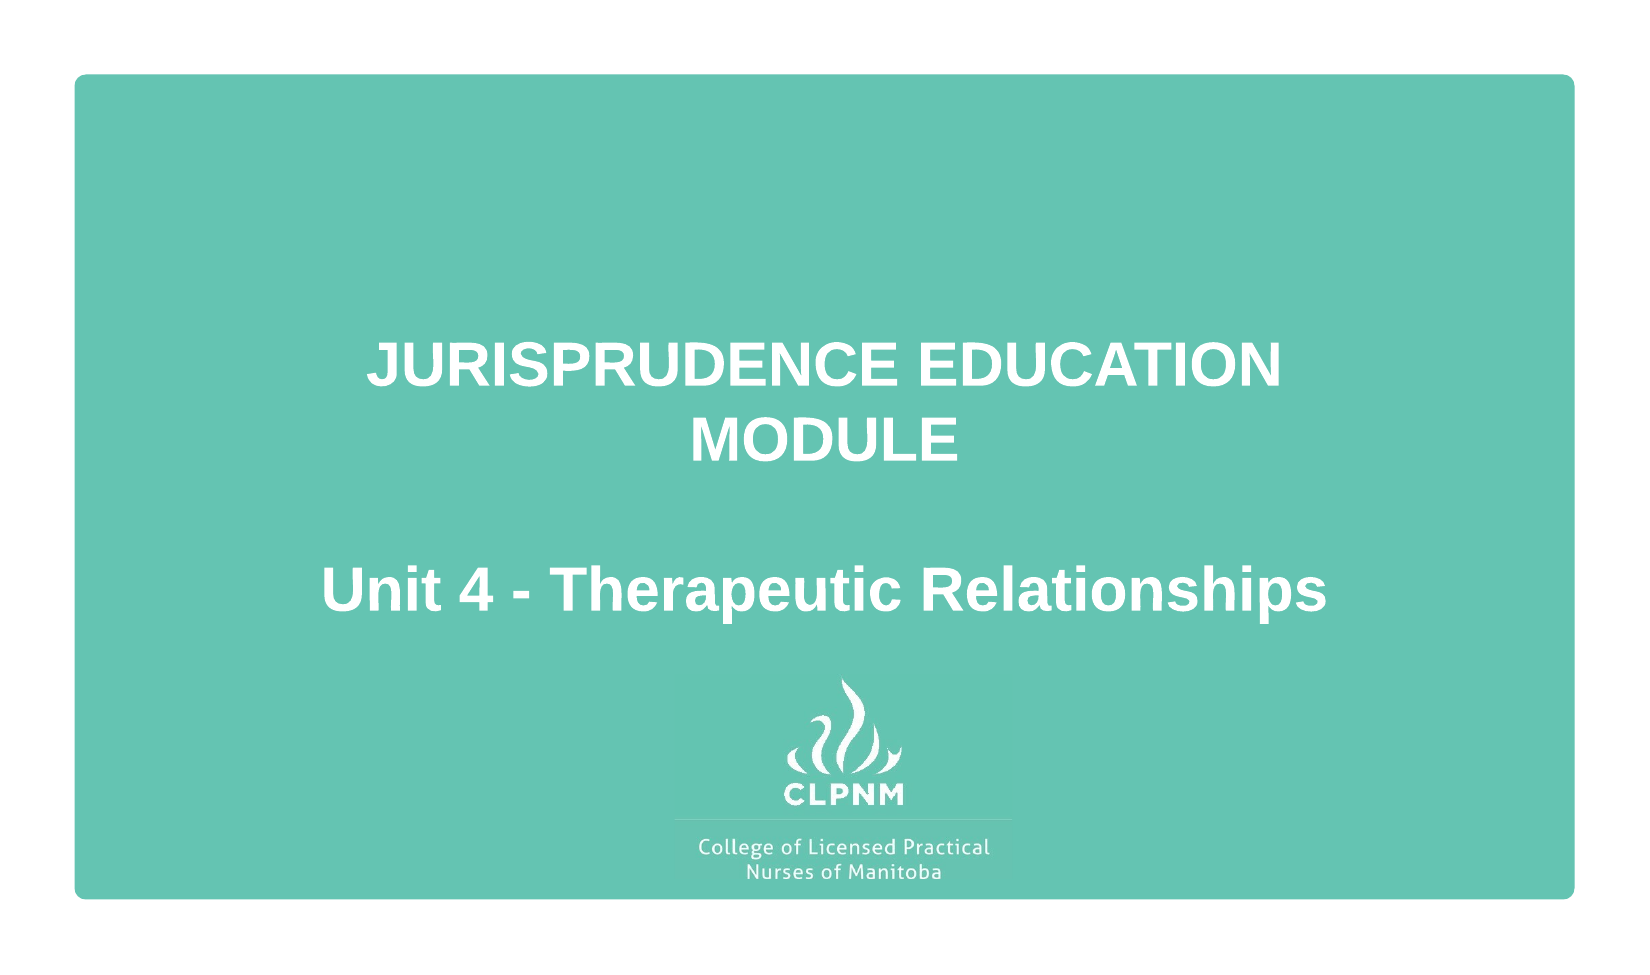 Unit 4: Therapeutic Relationships